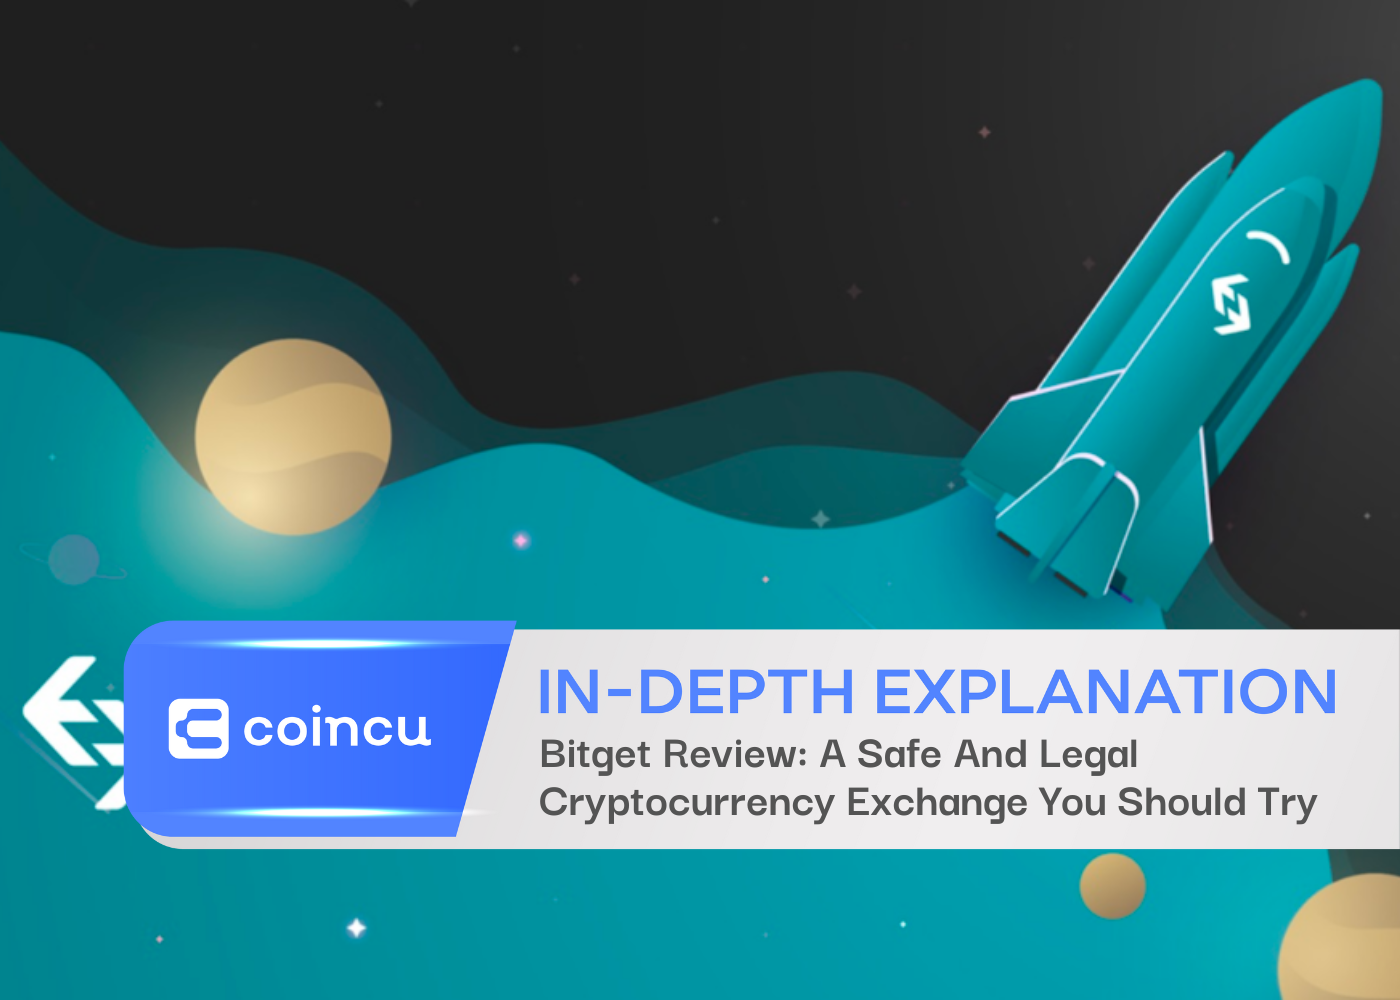 Bitget Review: A Safe And Legal Cryptocurrency Exchange You Should Try